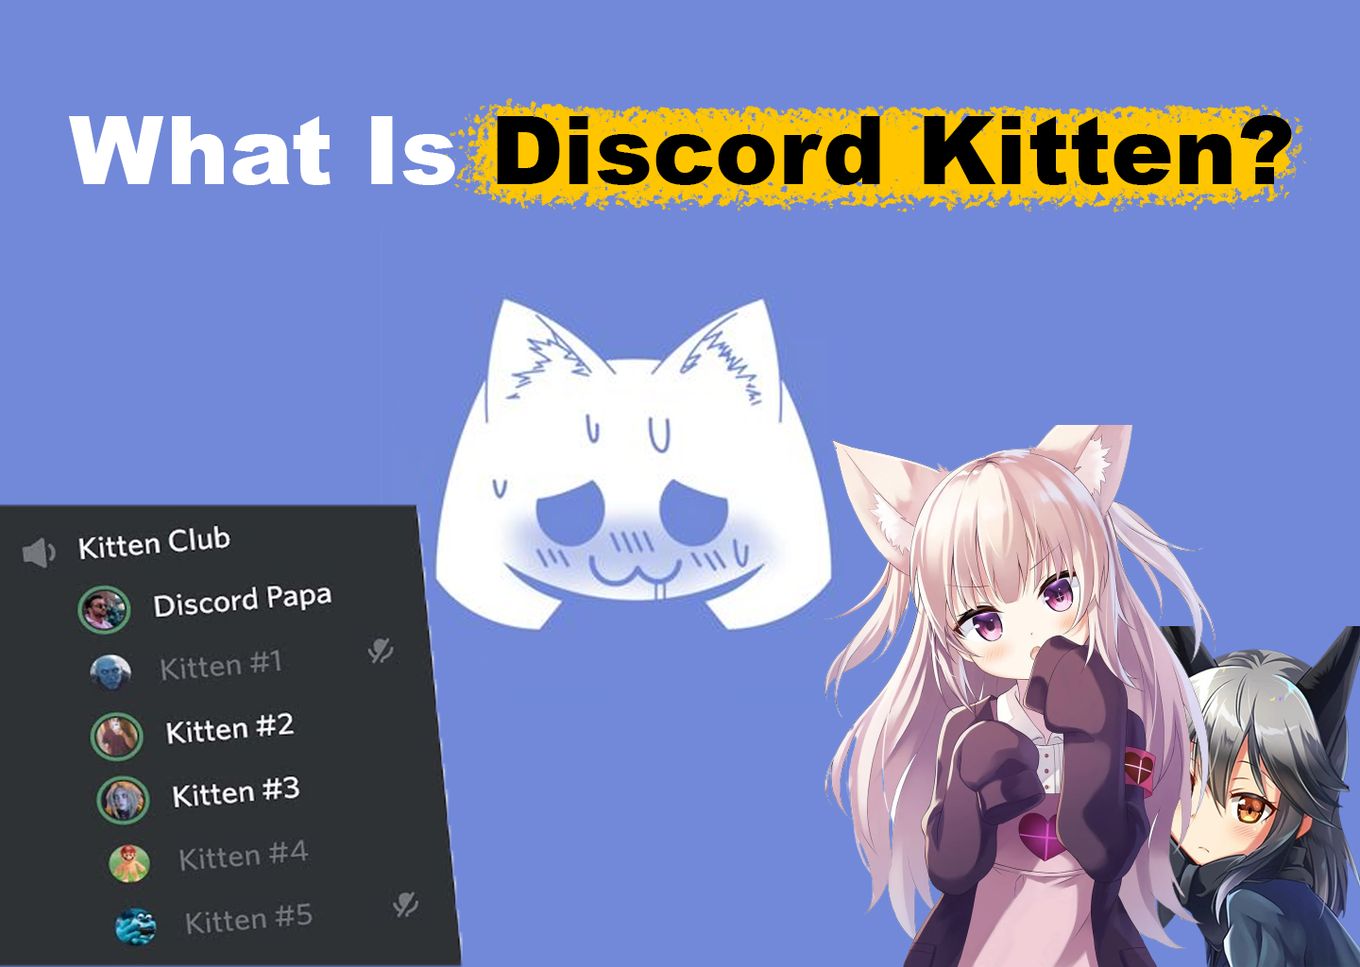 Discord Kitten Explained [What They Are & What They Do]